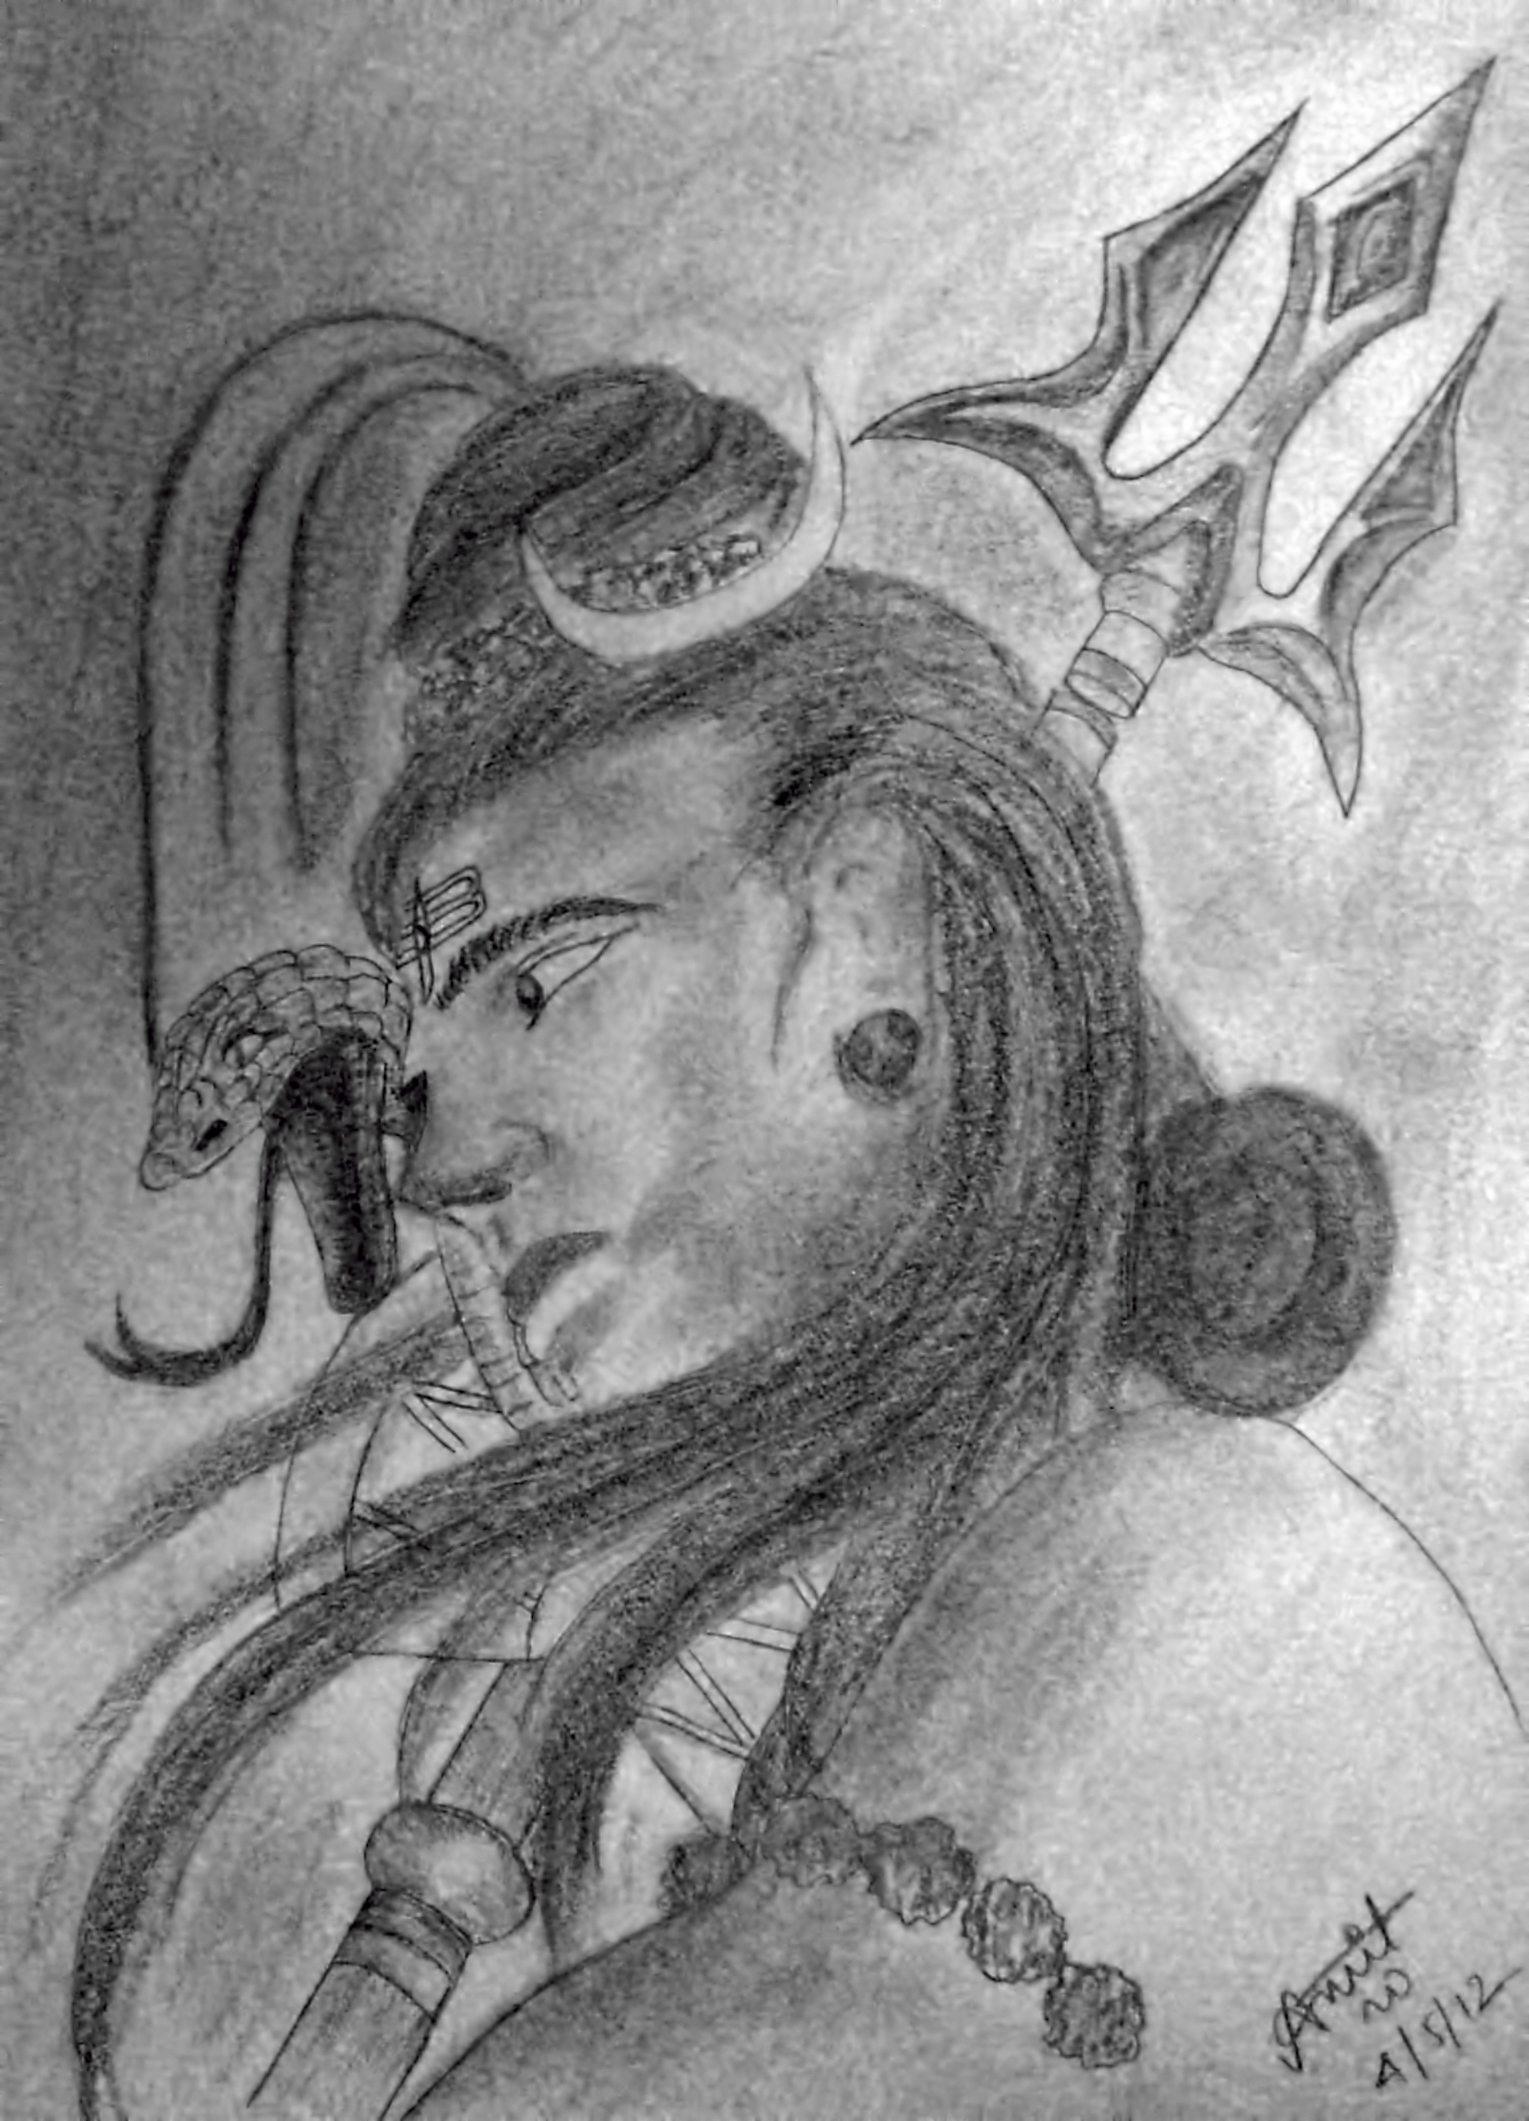 Shiva Drawings for Sale (Page #2 of 5) - Fine Art America